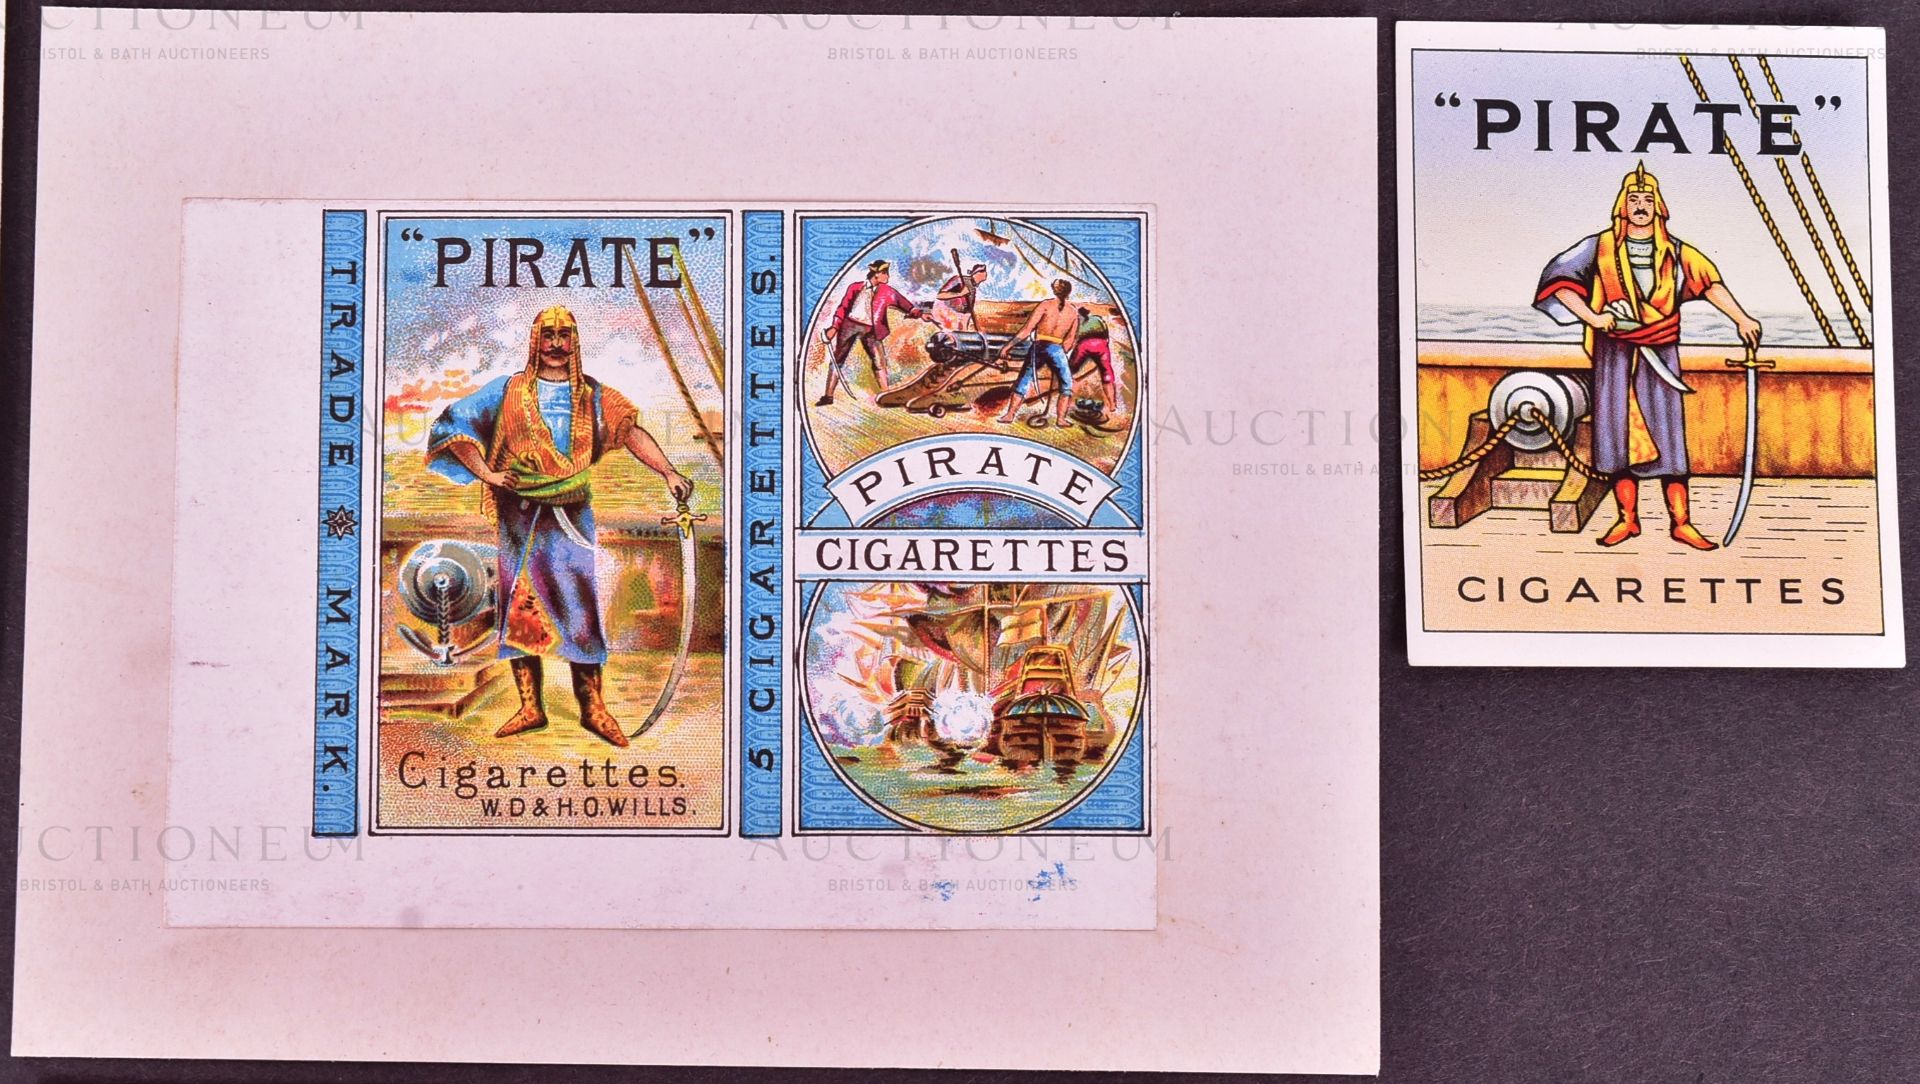 MARDON, SON & HALL - EARLY 20TH CENTURY CIGARETTE PACKET DESIGNS - Image 4 of 7